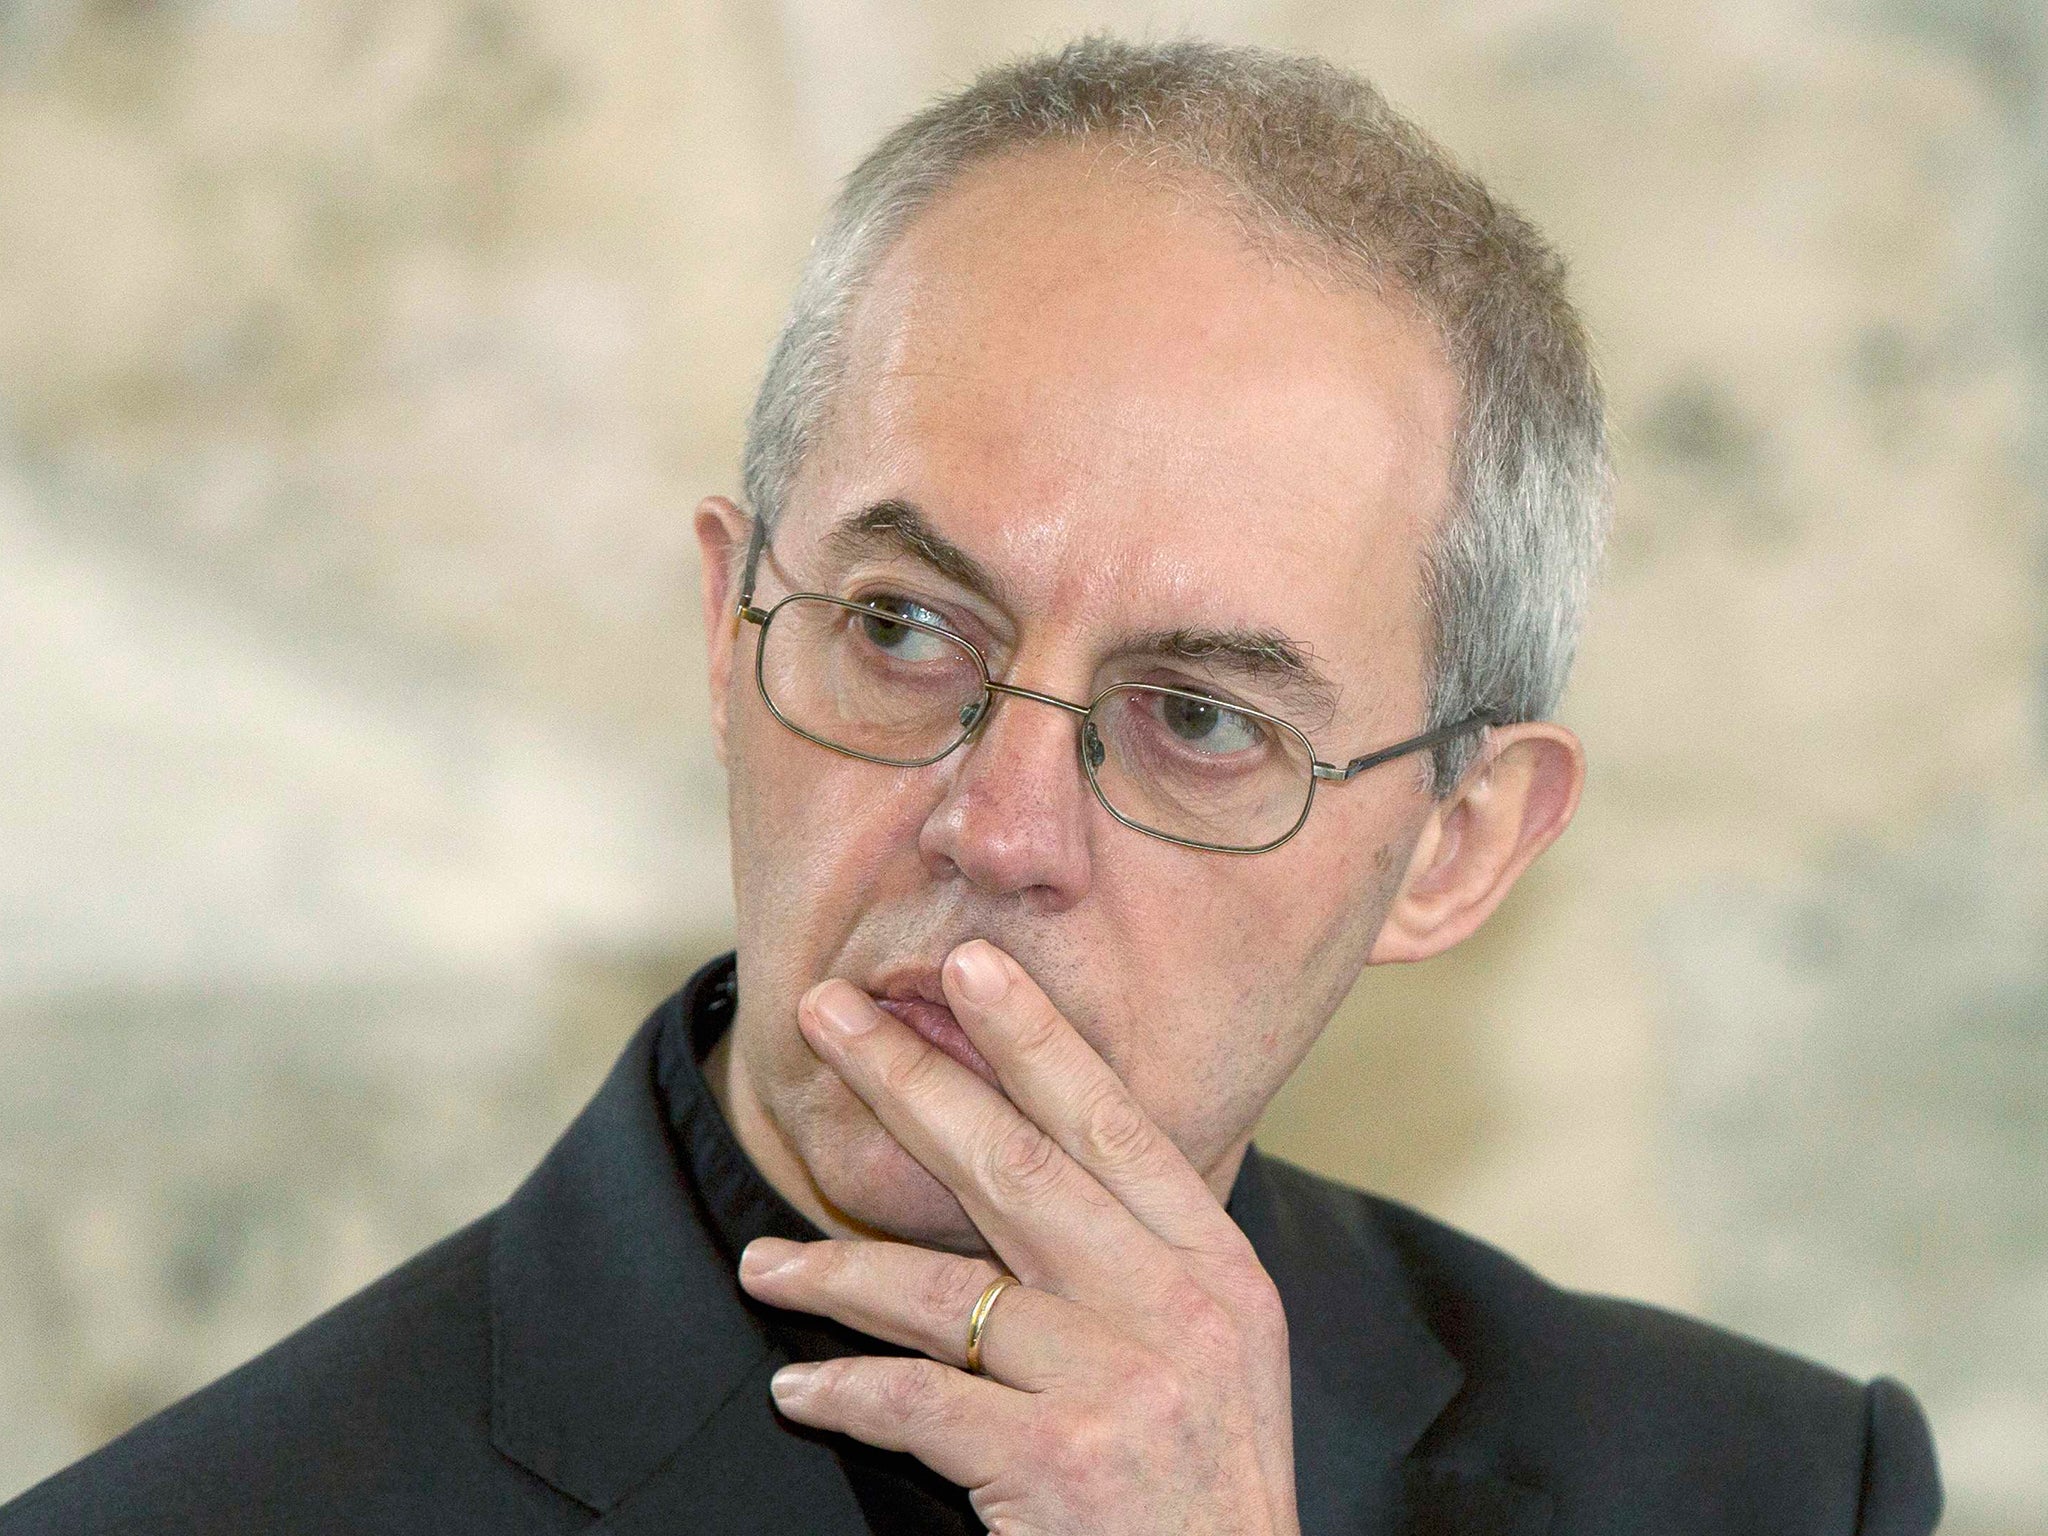 Archbishop Welby said the news 'does not change anything at all'